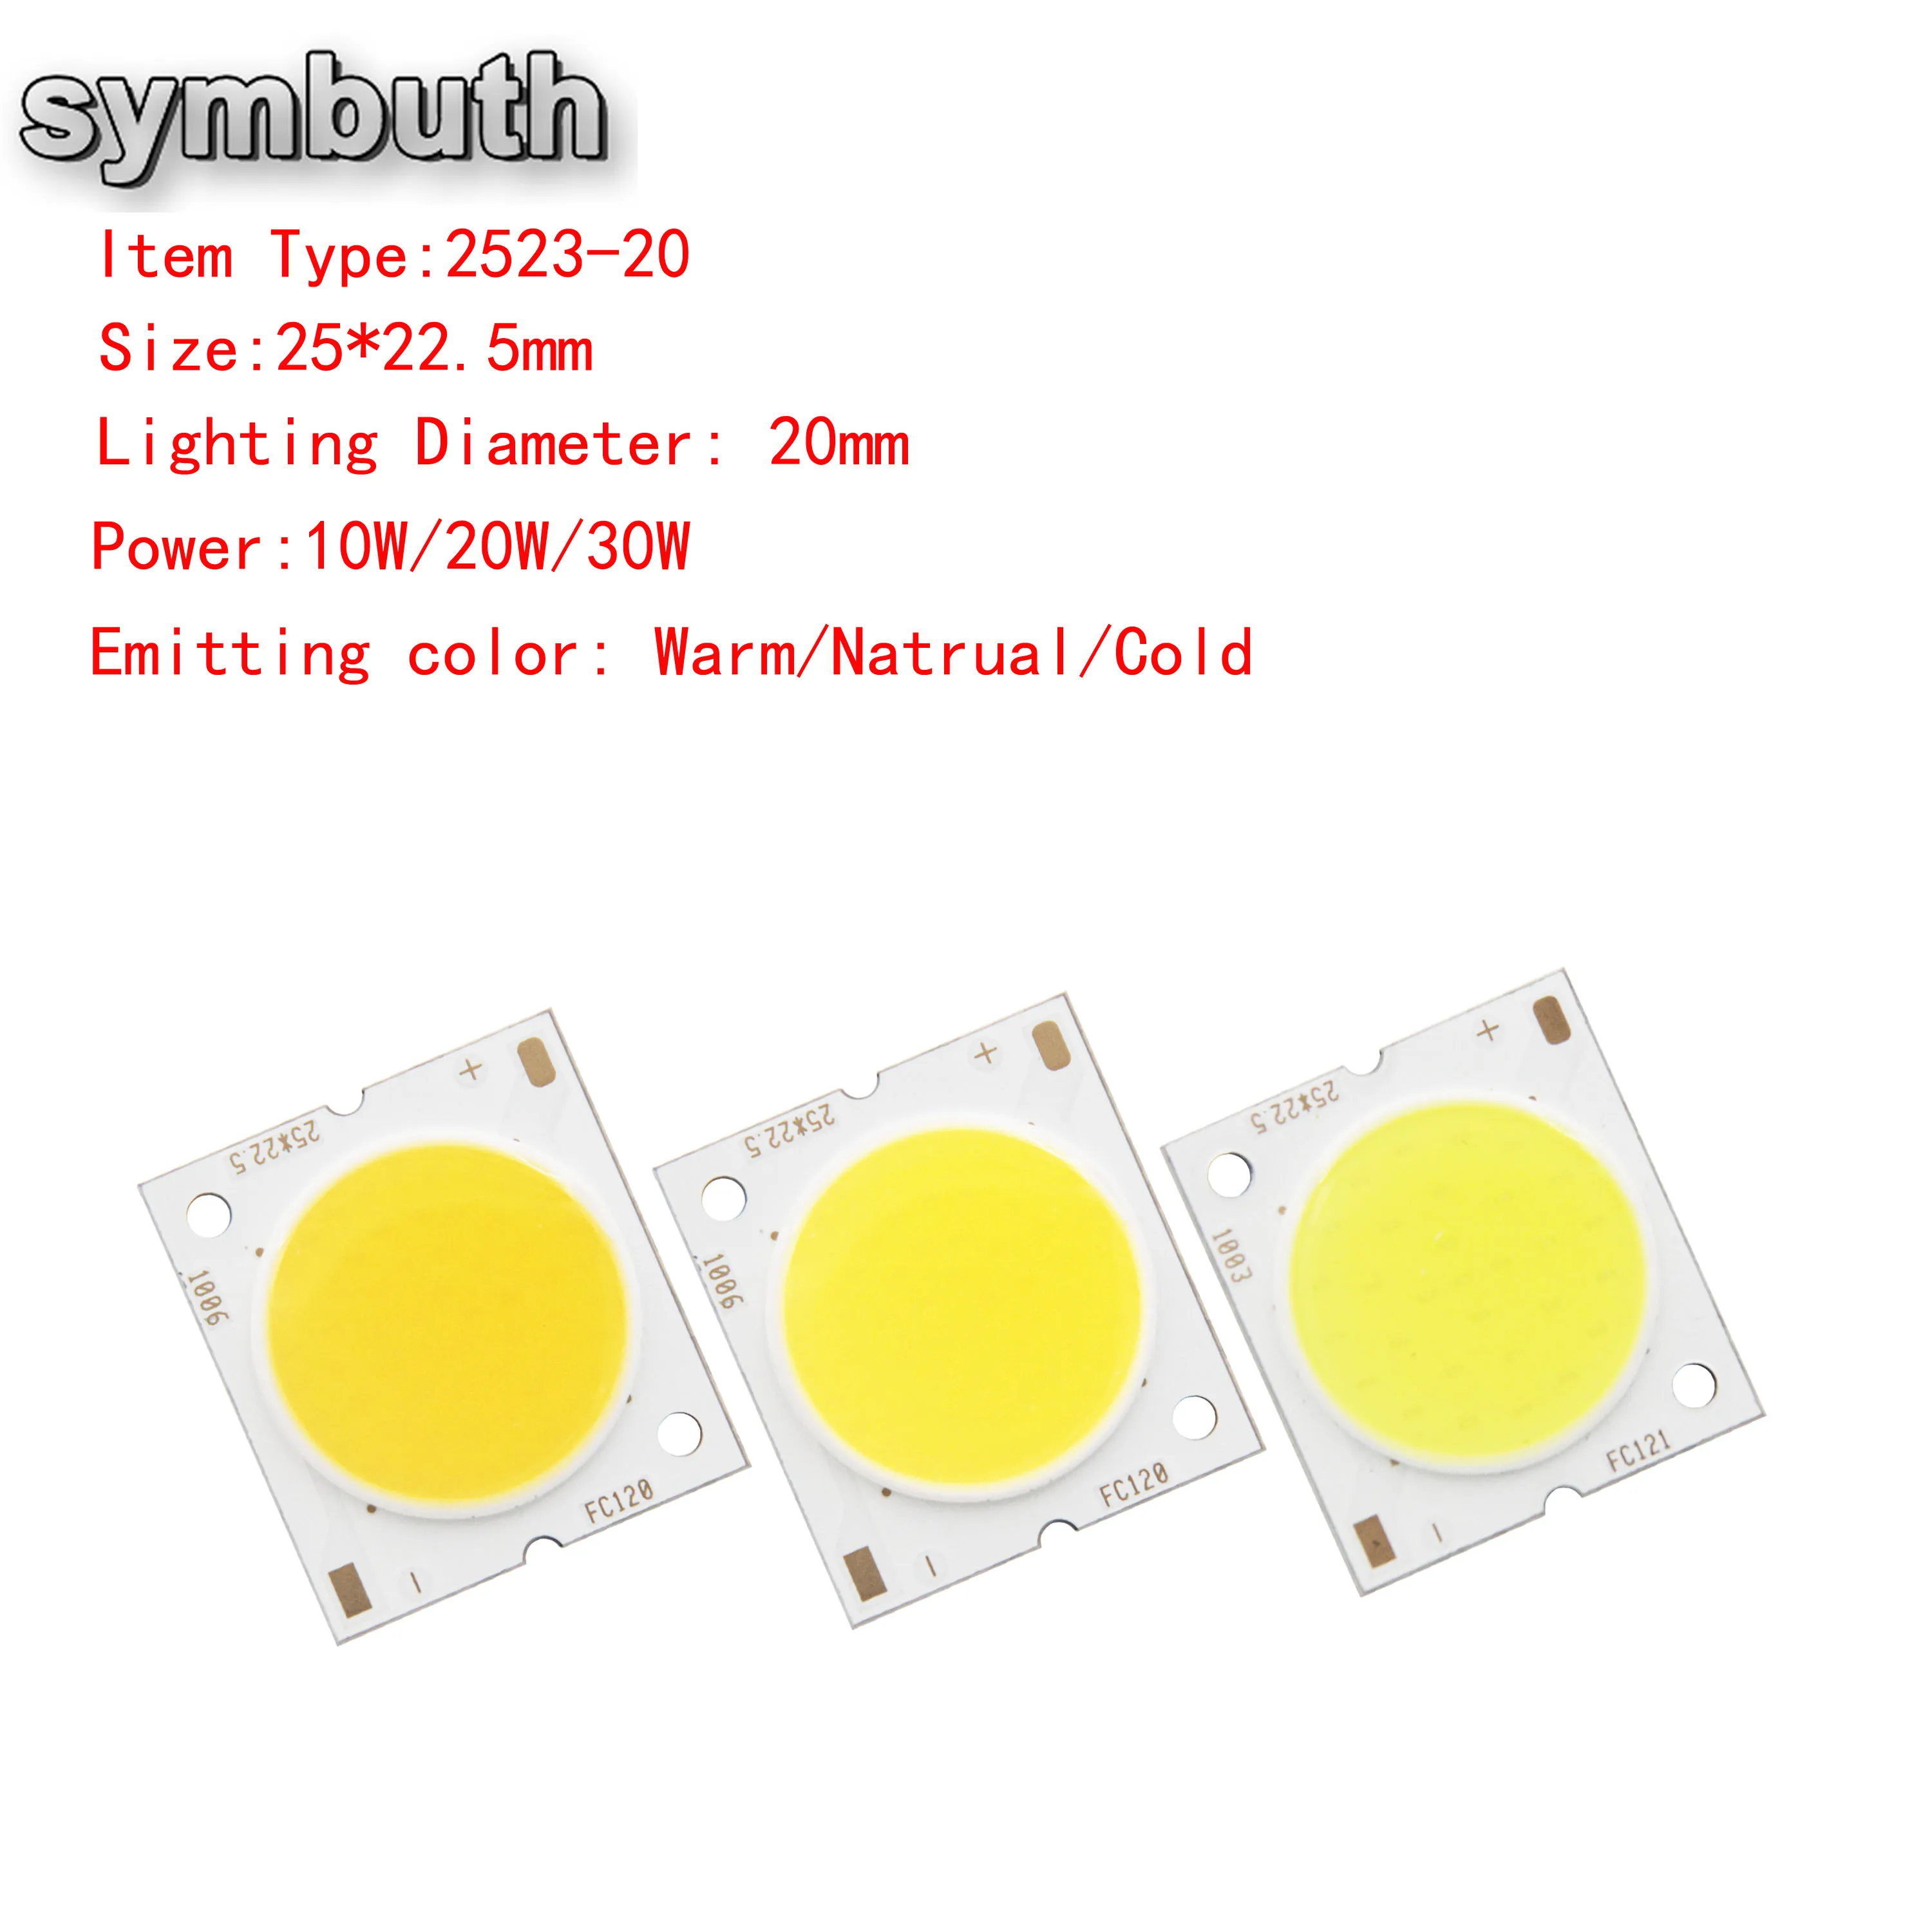 

25*23mm 20mm Lighting Diameter Led Cob Spotlight Source Cold Warm Nature White for Down Track Lamp 10W 20W 30W Led Diode Led